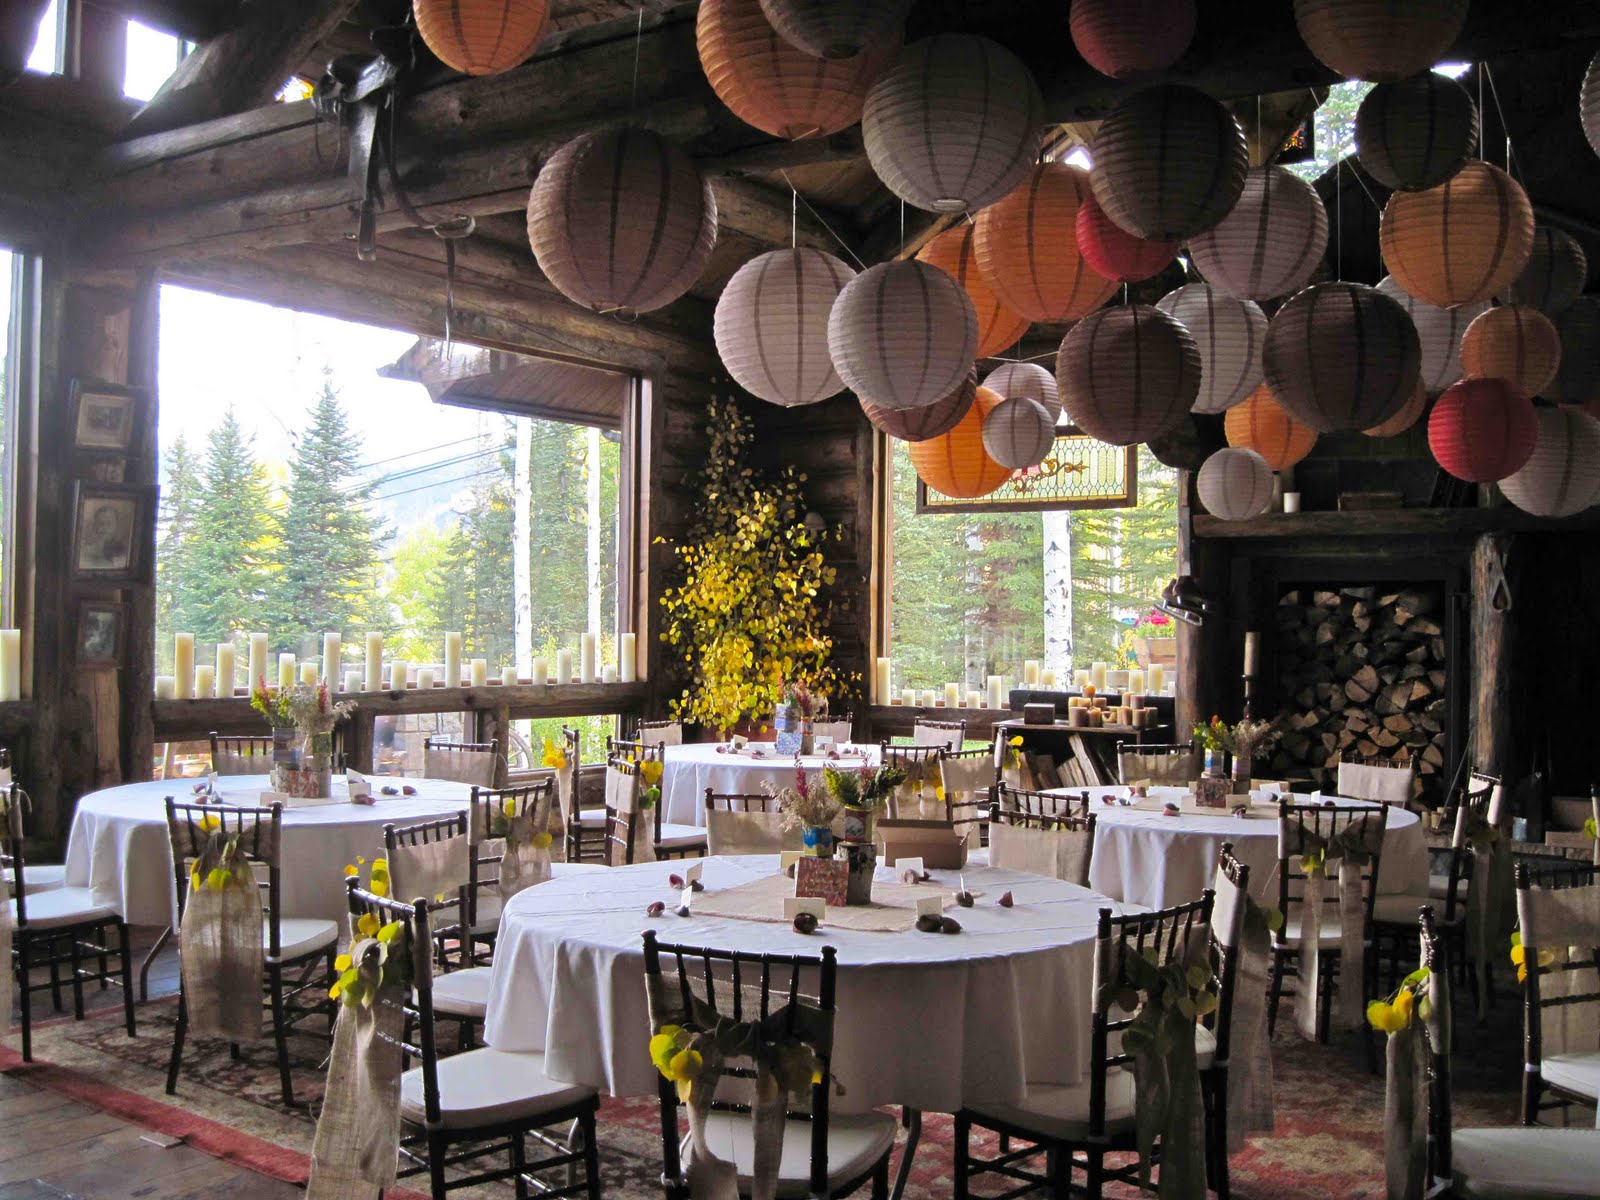 NEW To Telluride Rentals Weddings Special Events Telluride